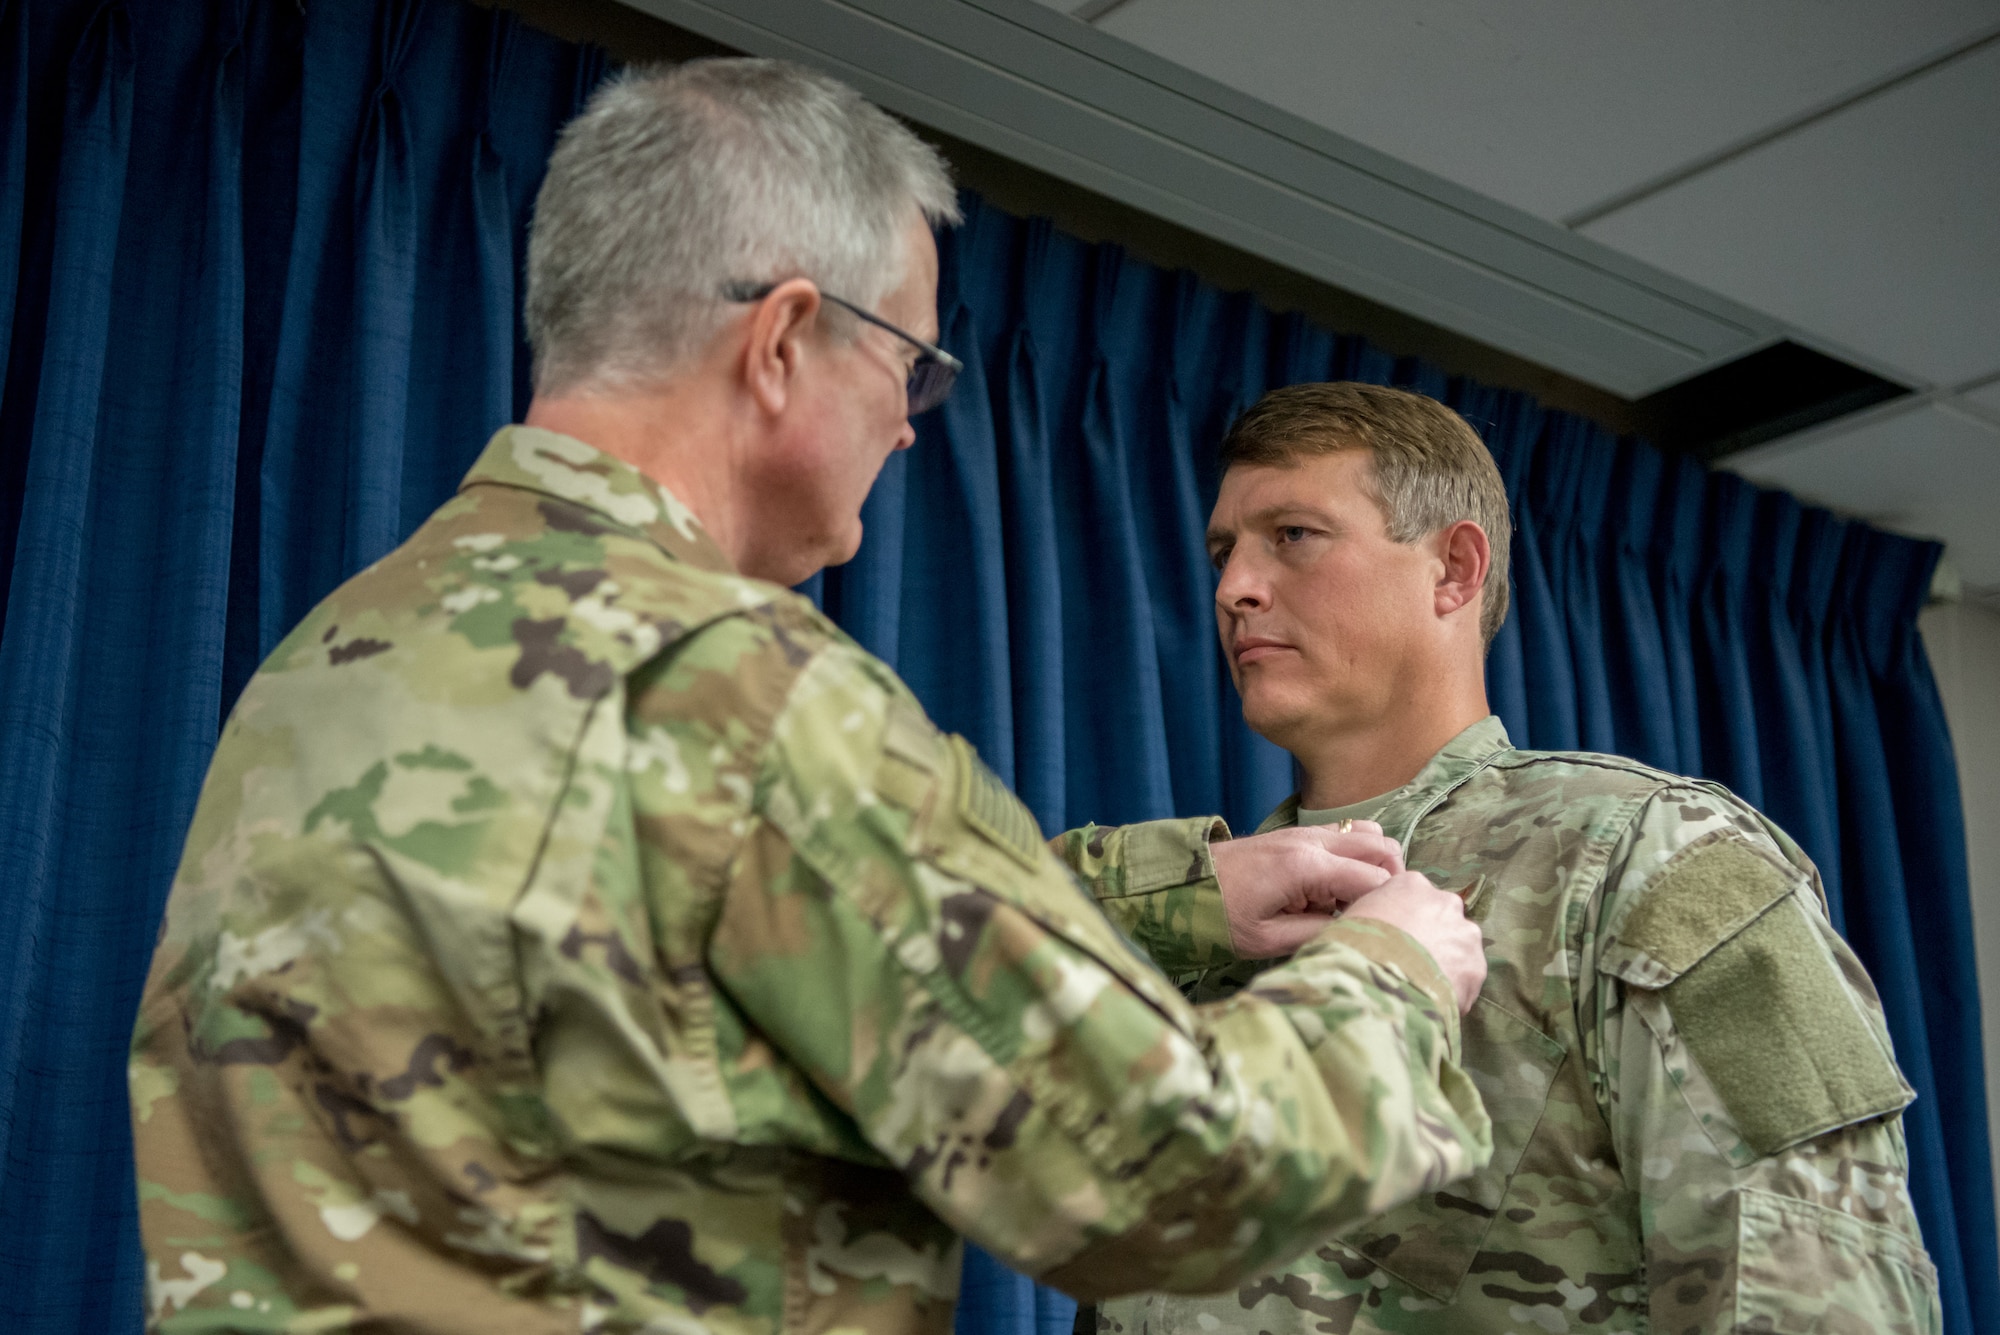 Master Sgt. Benjamen K. Pelster (right), a combat controller for the 123rd Special Tactics Squadron, receives the Bronze Star Medal from Col. David Mounkes, commander of the 123rd Airlift Wing, during a ceremony at the Kentucky Air National Guard Base in Louisville, Ky., Nov. 17, 2018. Pelster was instrumental in the execution of nine missions across five countries involving seven landing zones, nine forward area refueling point surveys and one drop zone certification in 2014. His efforts led to the establishment and expansion of critical air infrastructure in support of Operation Inherent Resolve and across the United States Air Forces Central Command’s area of responsibility. (U.S. Air National Guard photo by Staff Sgt. Joshua Horton)